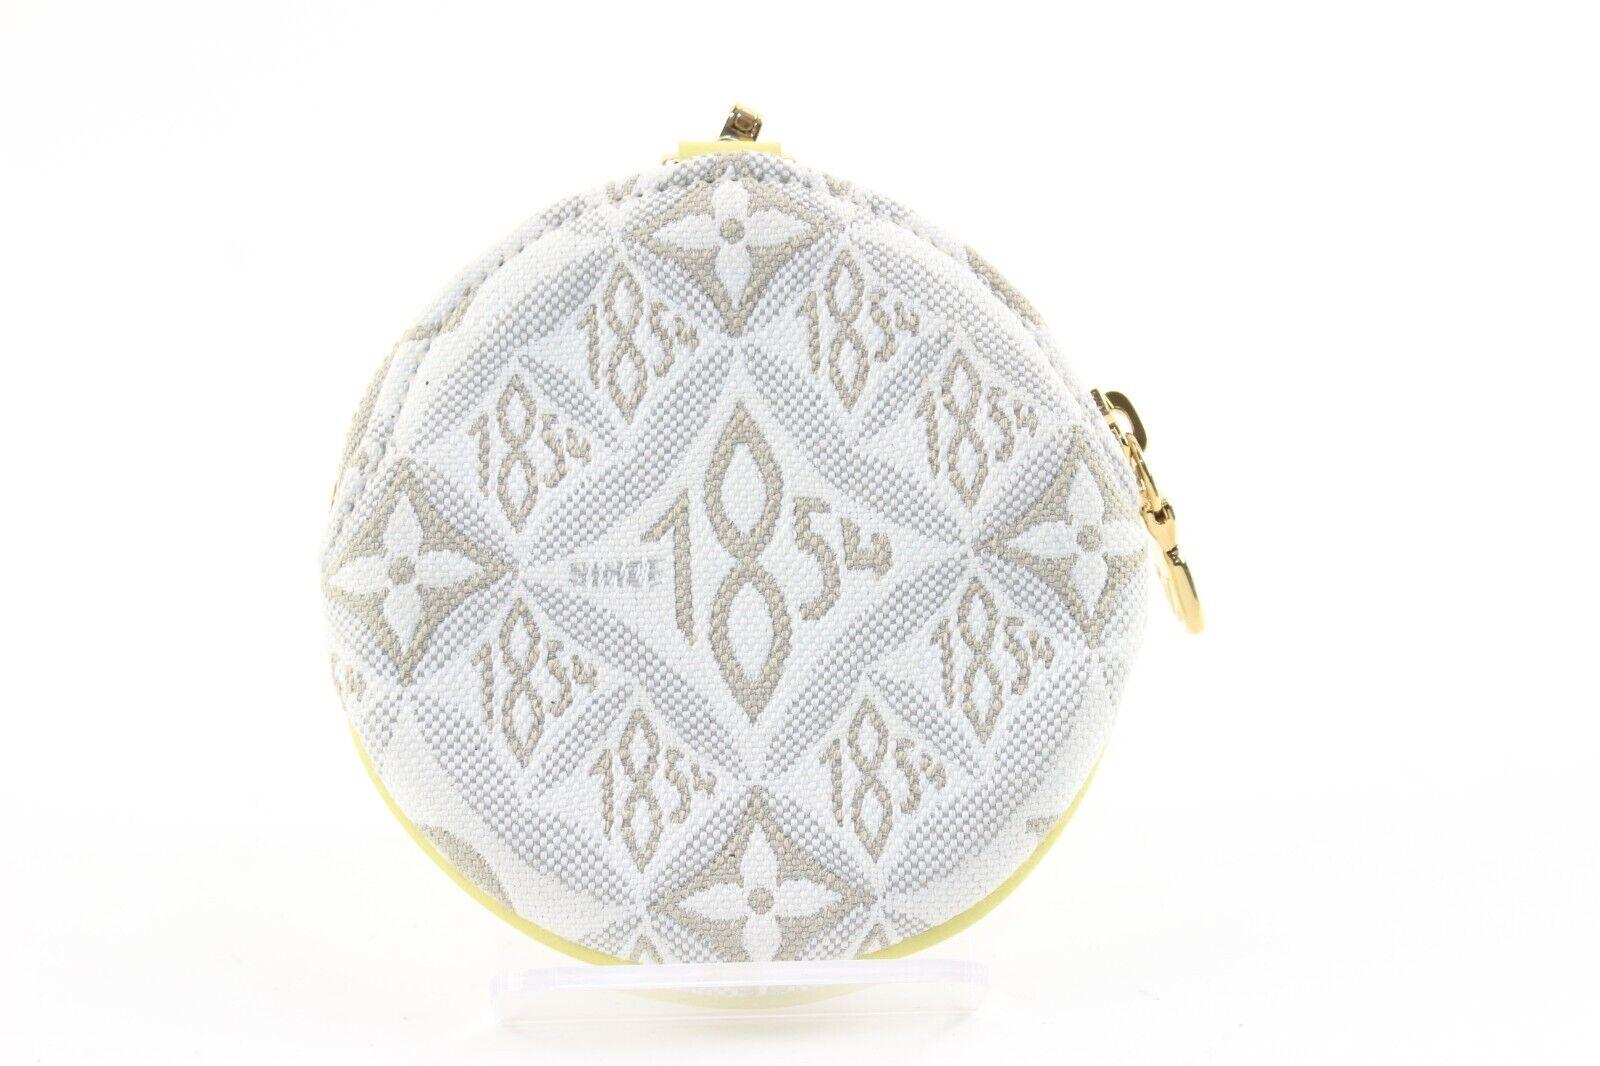 LOUIS VUITTON Rare 1854 Monogram Coin Purse 2LV1212K In Good Condition For Sale In Dix hills, NY